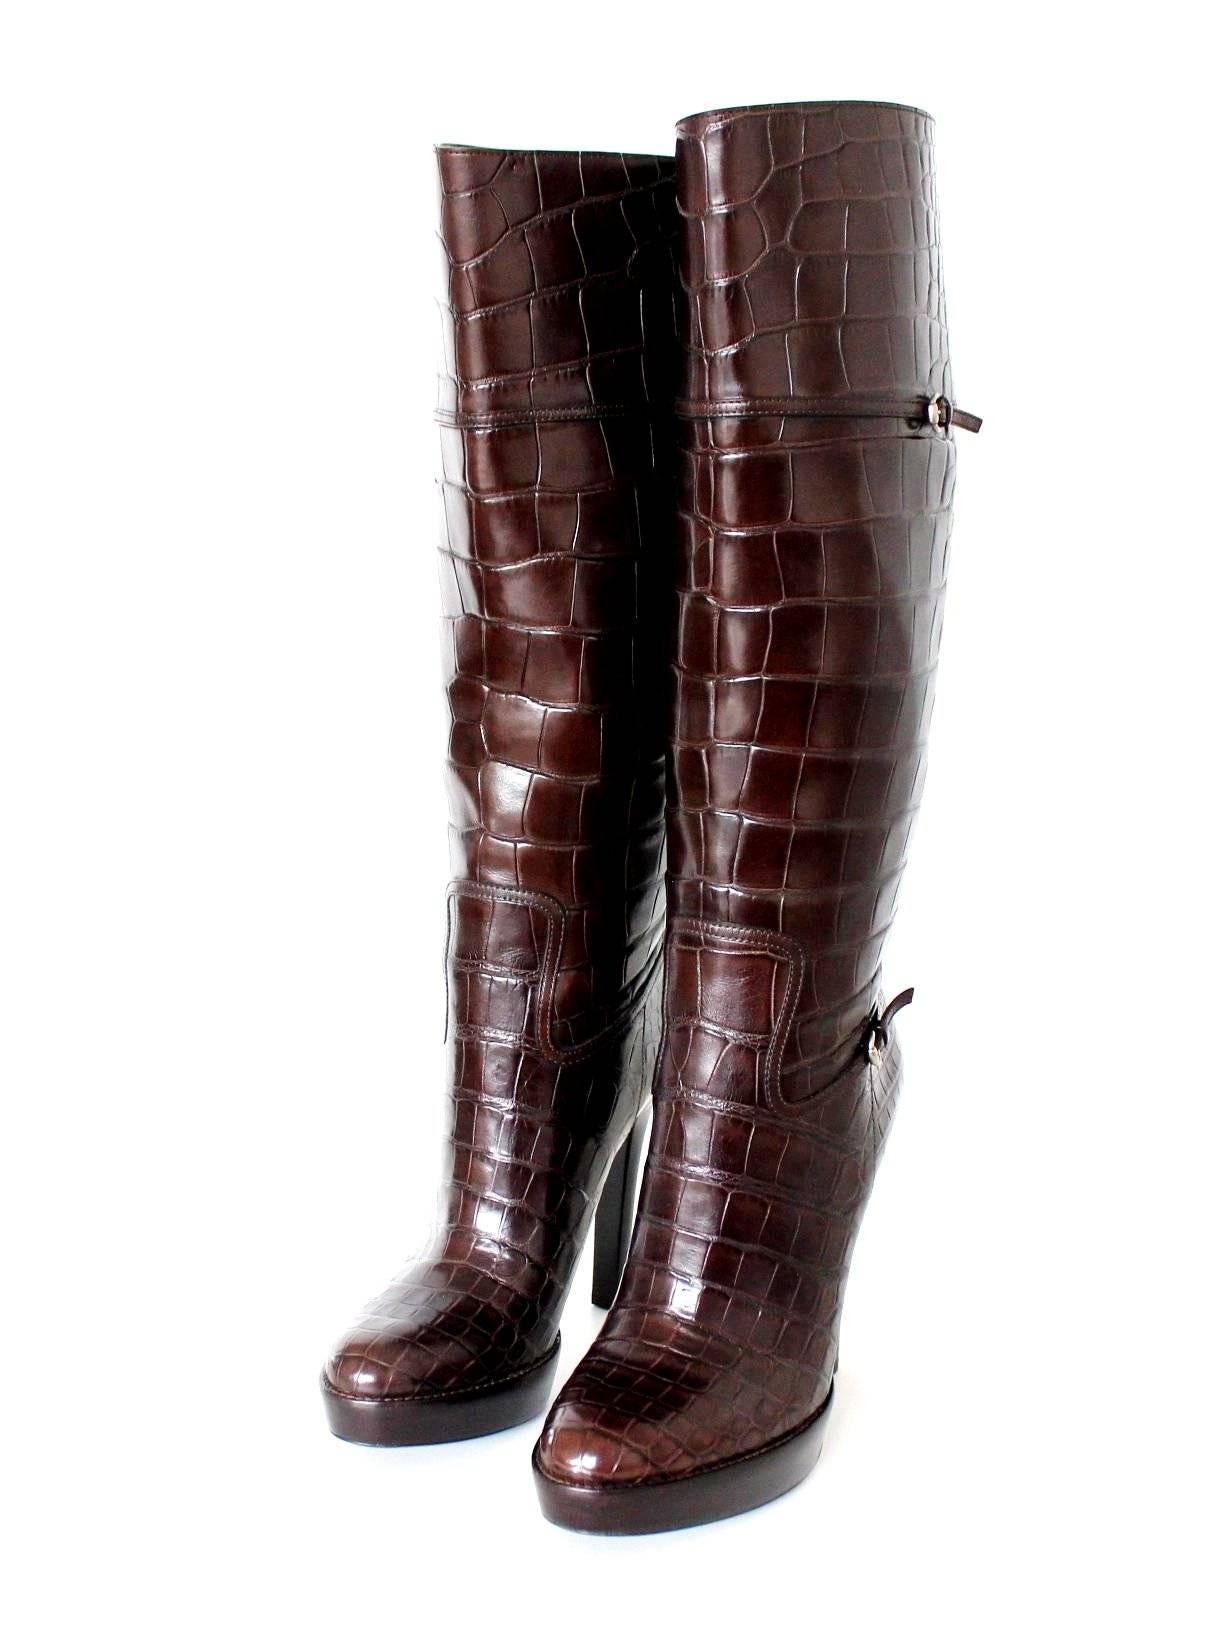 Women's NEW Gucci Exotic Brown Extra Tall Alligator Skin High Heels Boots 17899$ 41 For Sale